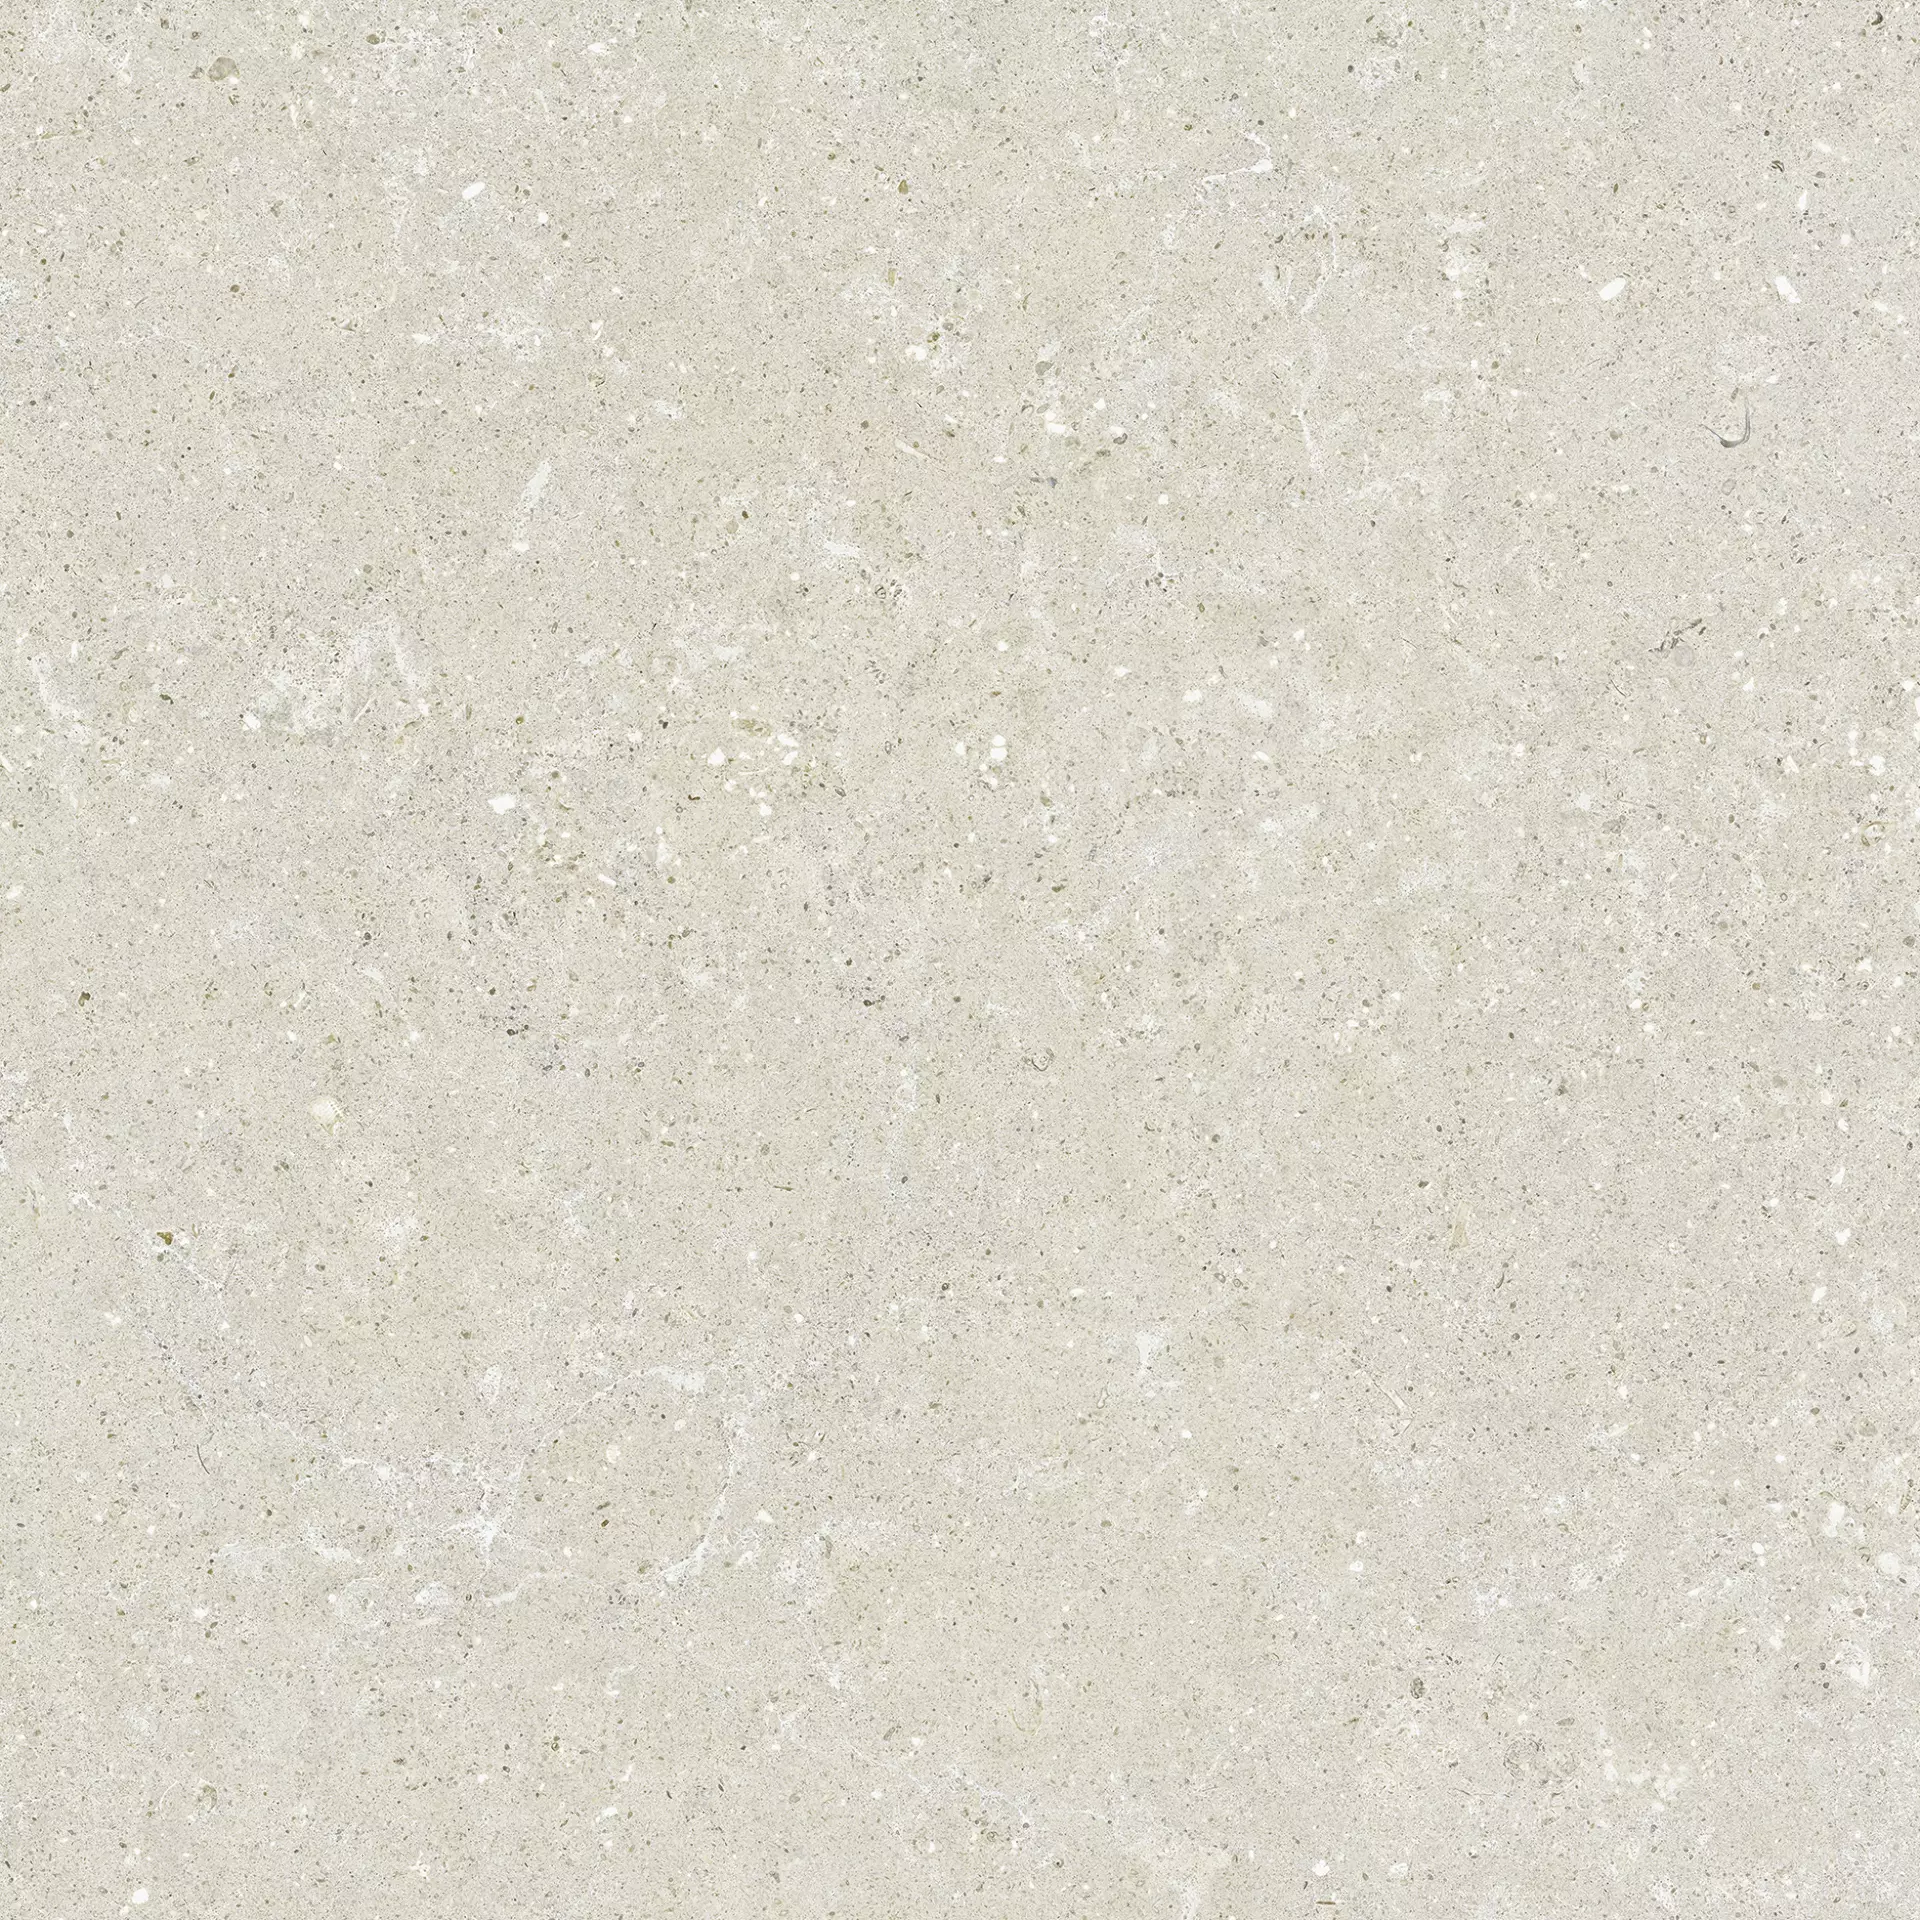 Del Conca Hwd Wild White Hwd Naturale G9WD10R 60x60cm rectified 8,5mm